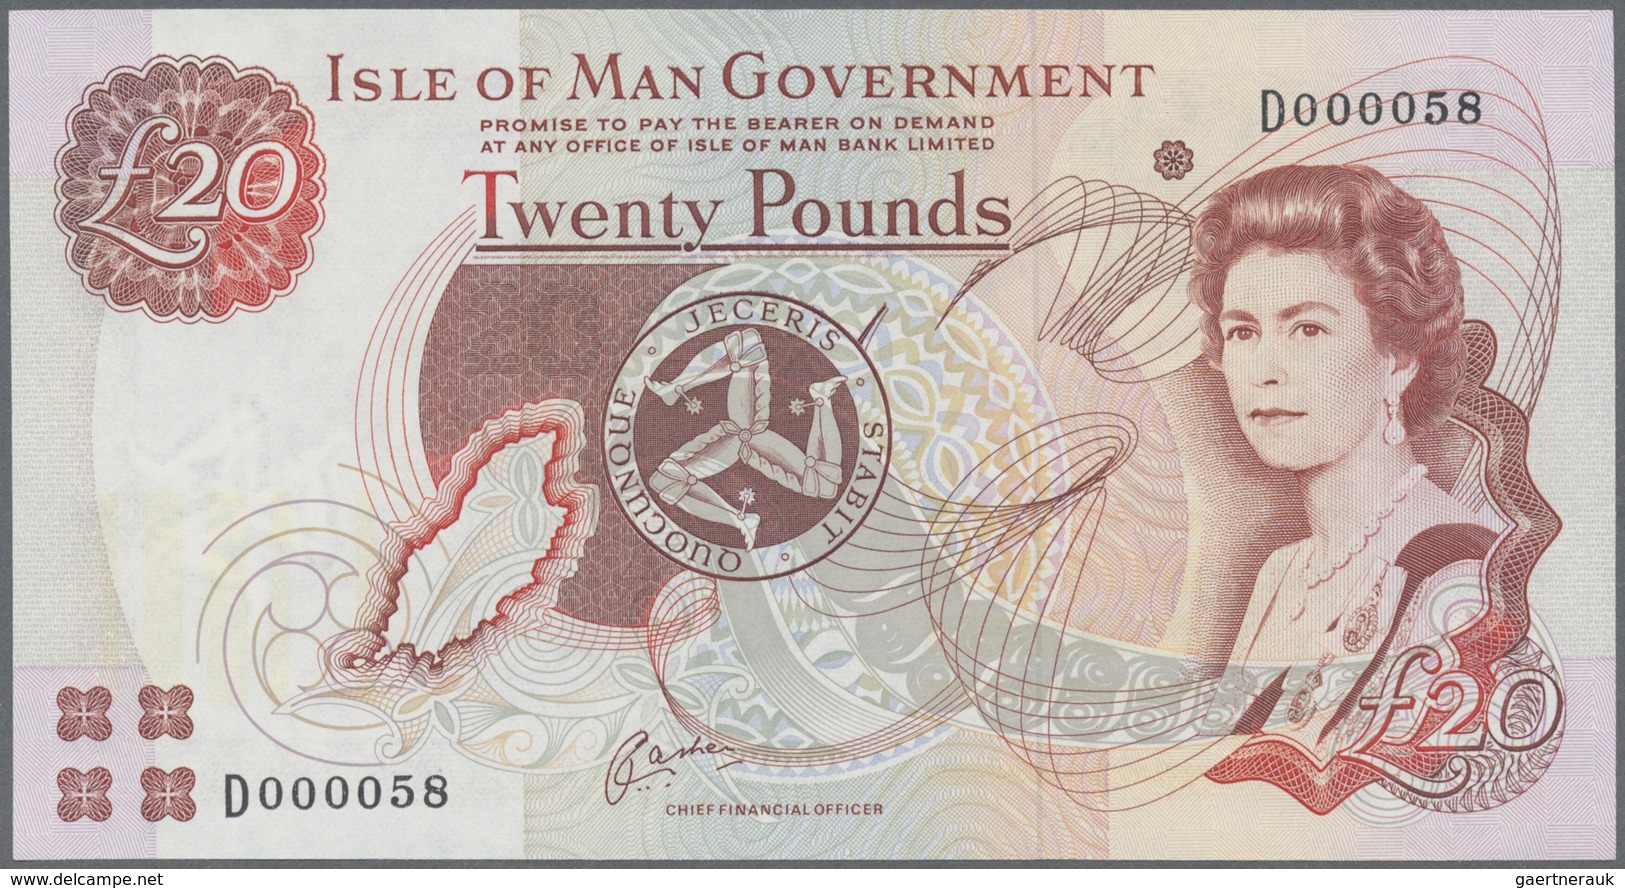 Isle of Man: Set with 4 Banknotes 1, 5, 10 and 20 Pounds ND(1990-2009), P.40b, 41b, 42b, 43b, all in